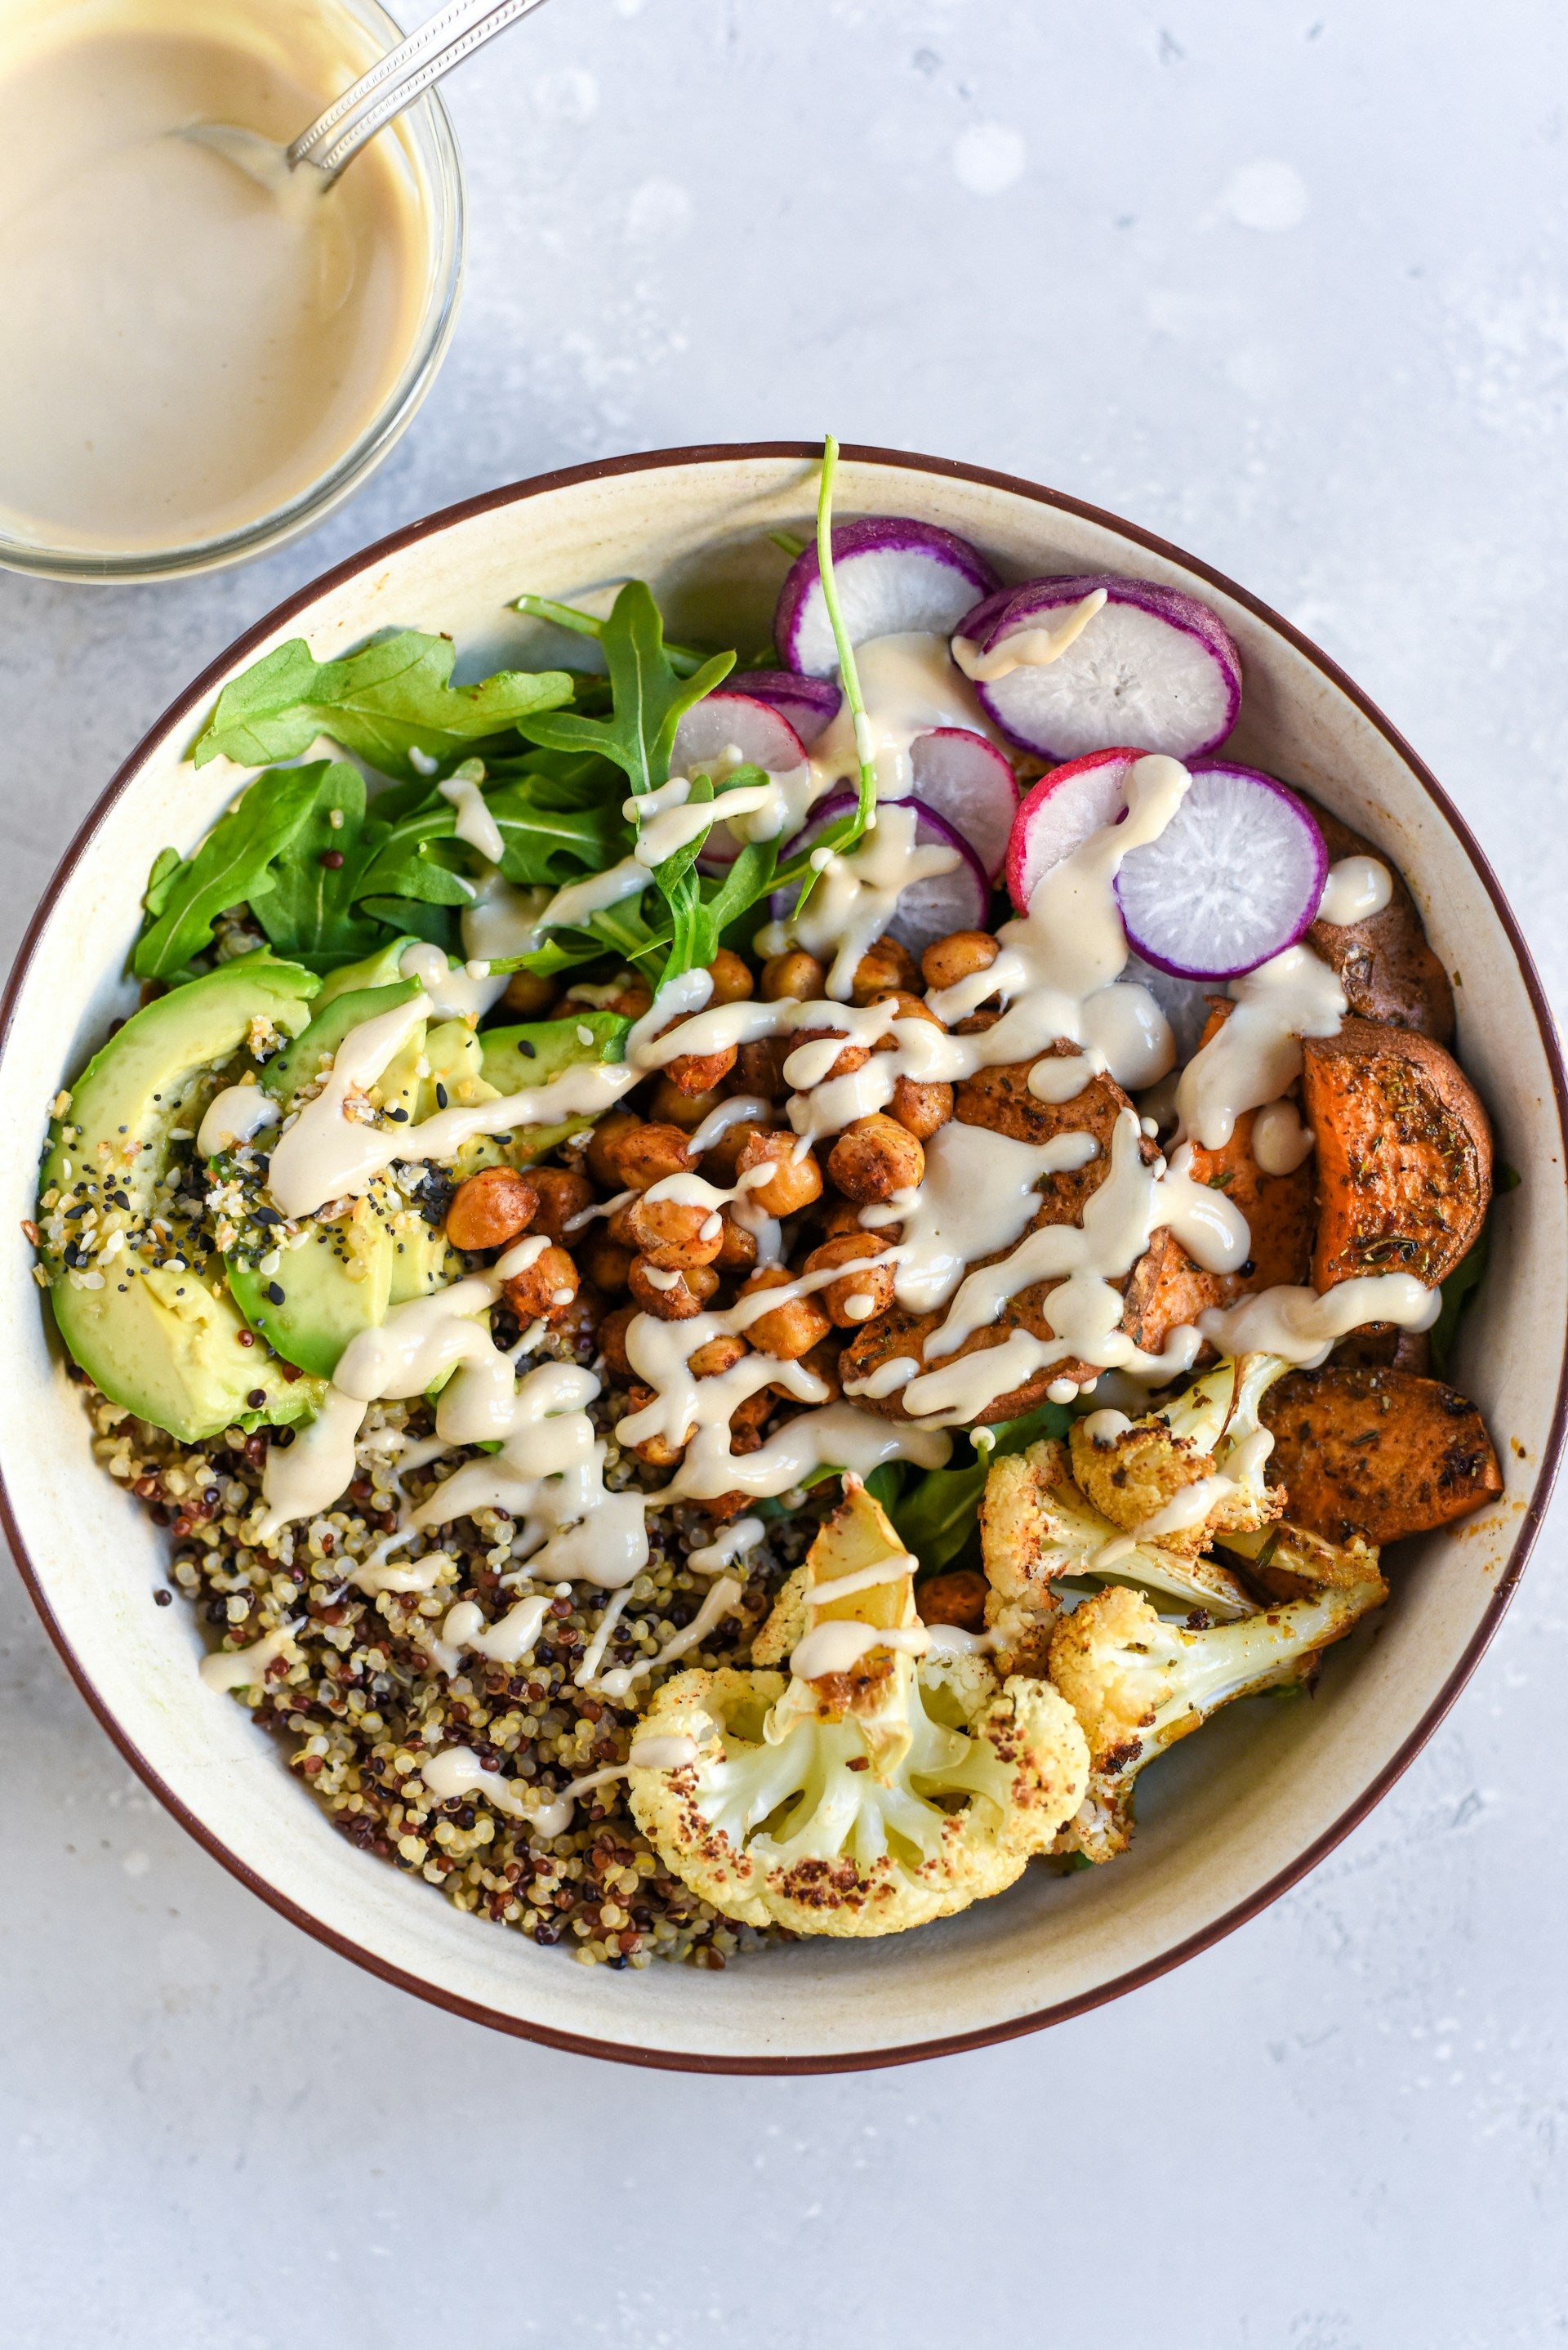 A delicious-looking, nutrient-dense nourish bowl packed with avocado, cauliflower, quinoa, radishes, cilantro, sweet potatoes, and more